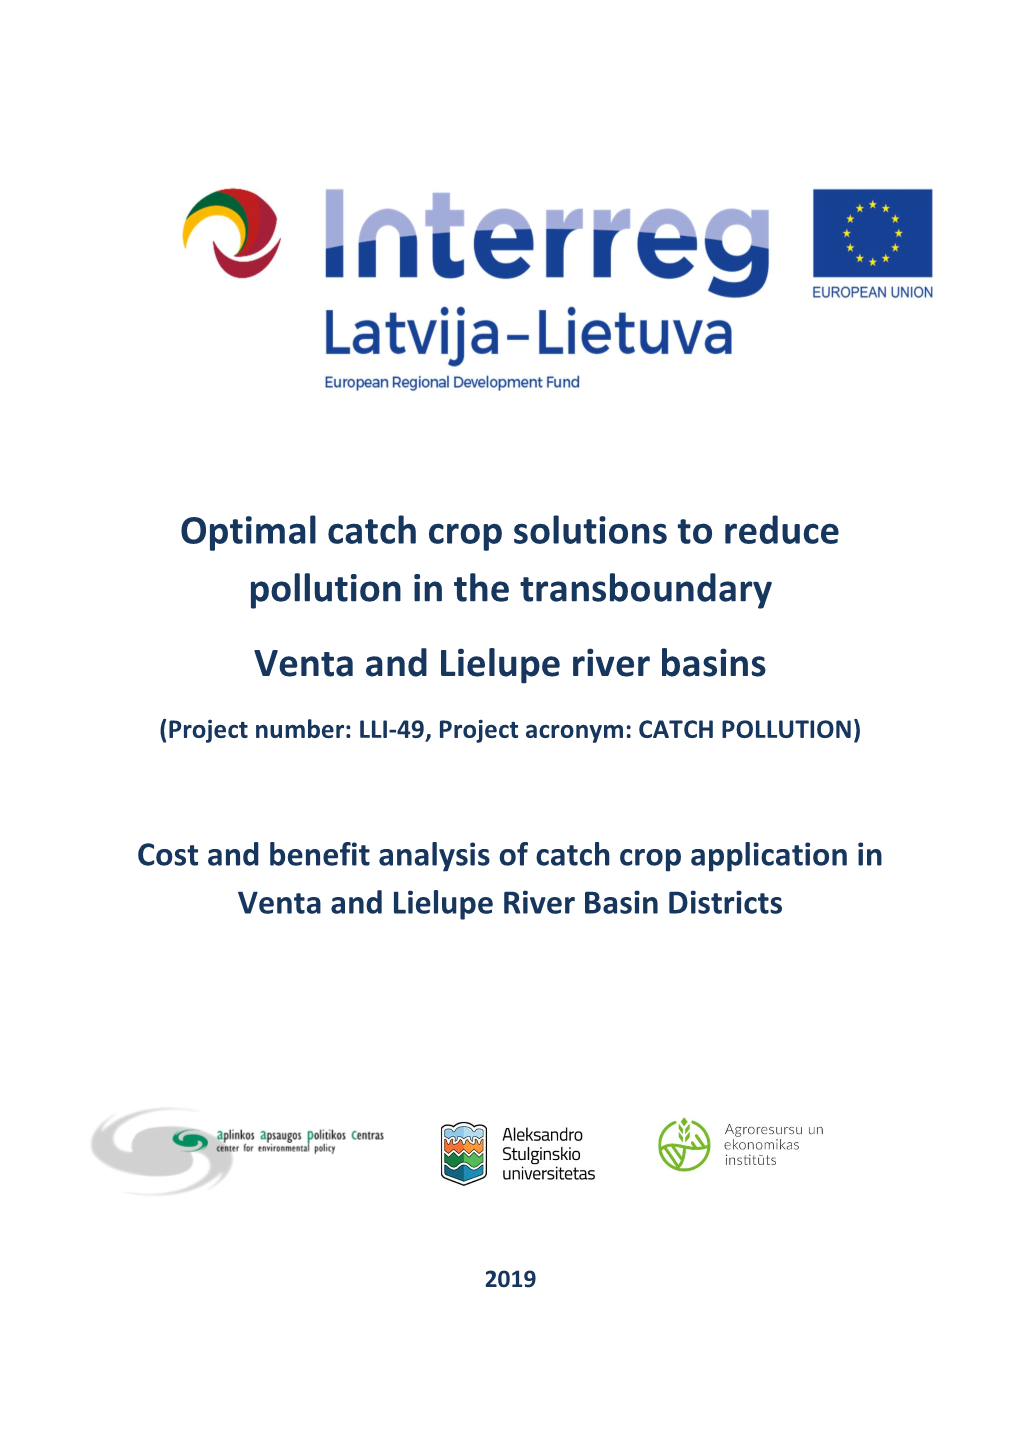 Optimal Catch Crop Solutions to Reduce Pollution in the Transboundary Venta and Lielupe River Basins